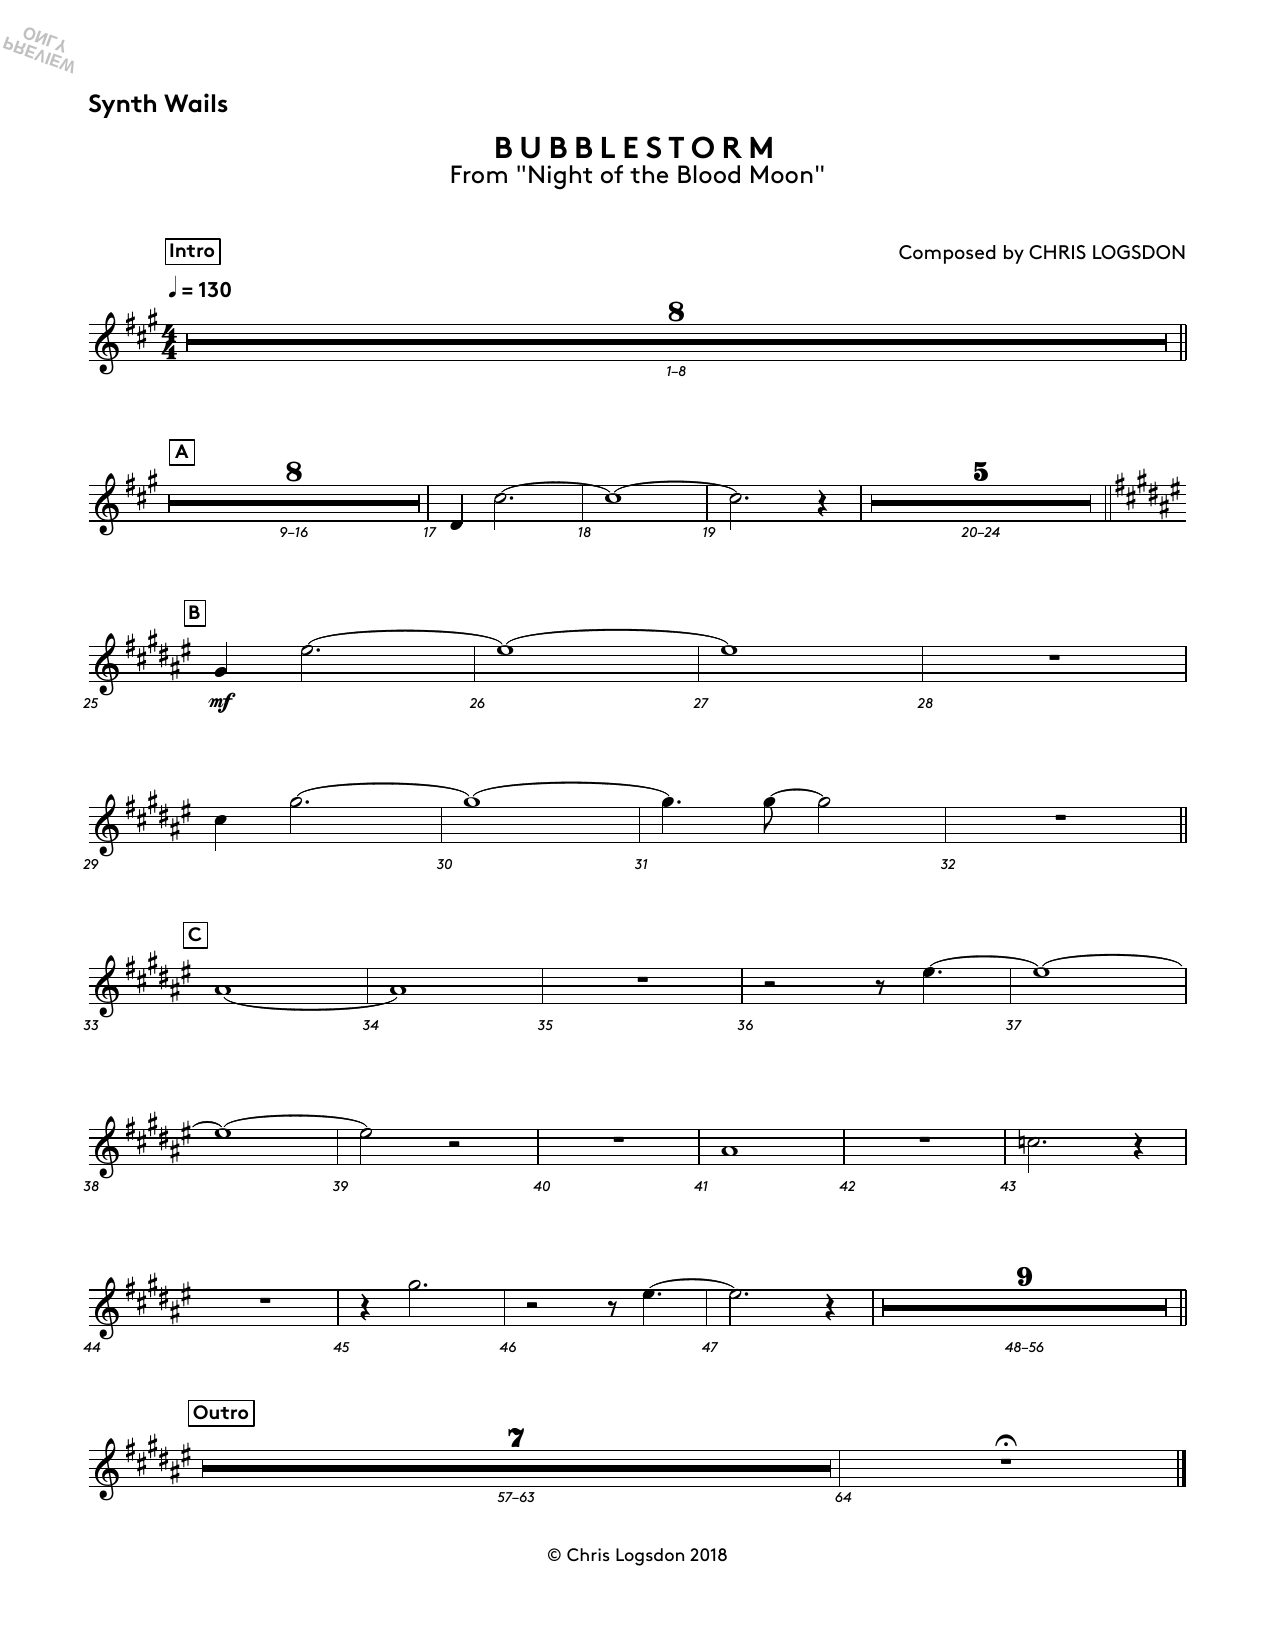 Chris Logsdon Bubblestorm (from Night of the Blood Moon) - Synth Wails sheet music preview music notes and score for Performance Ensemble including 1 page(s)